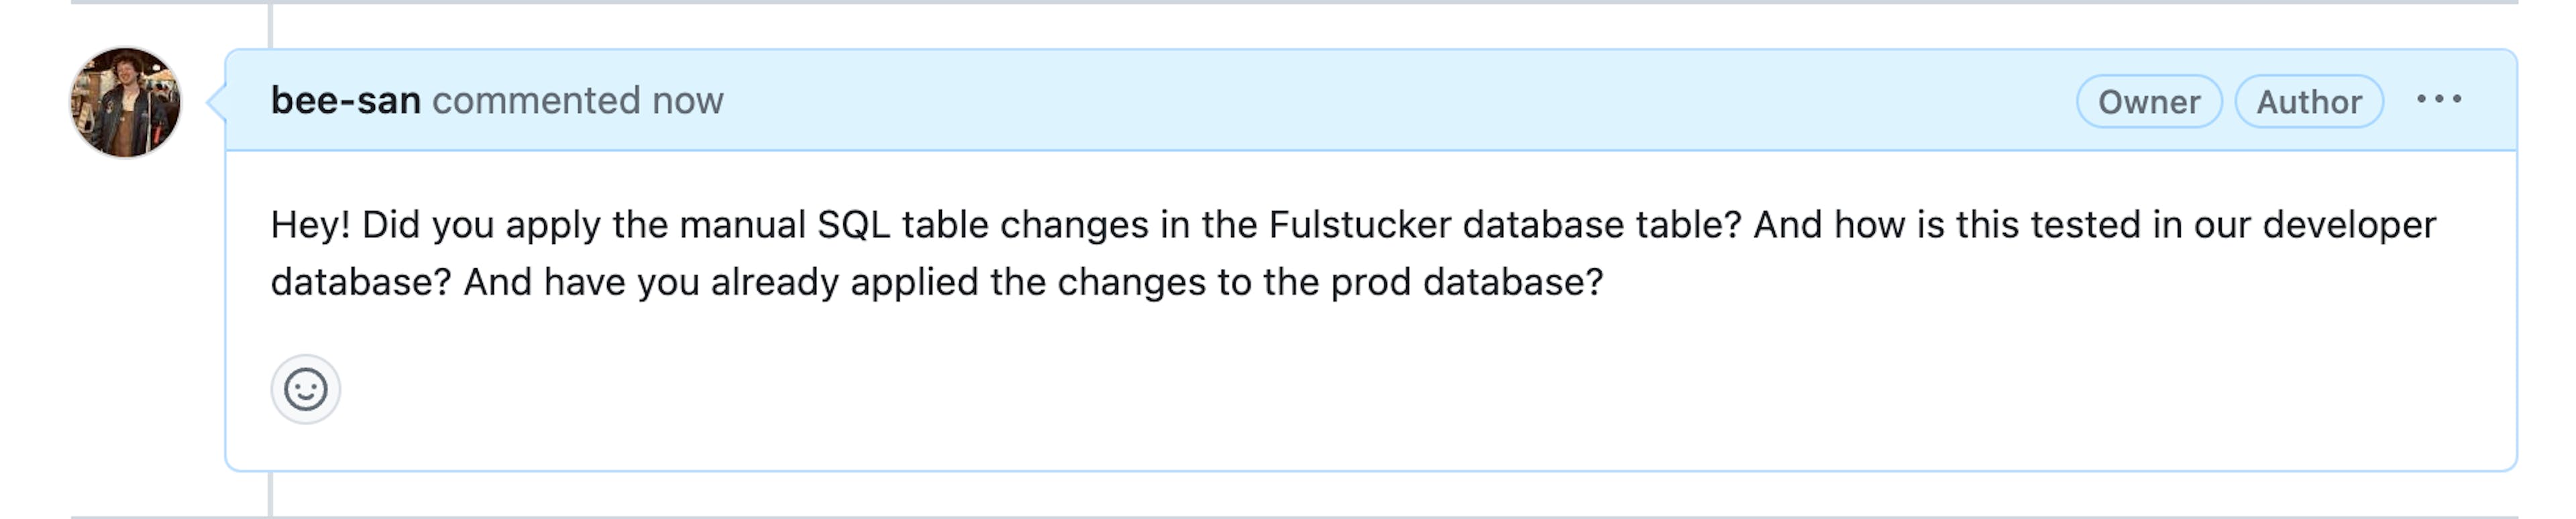 Sample pull request comment from someone asking me to make manual SQL changes